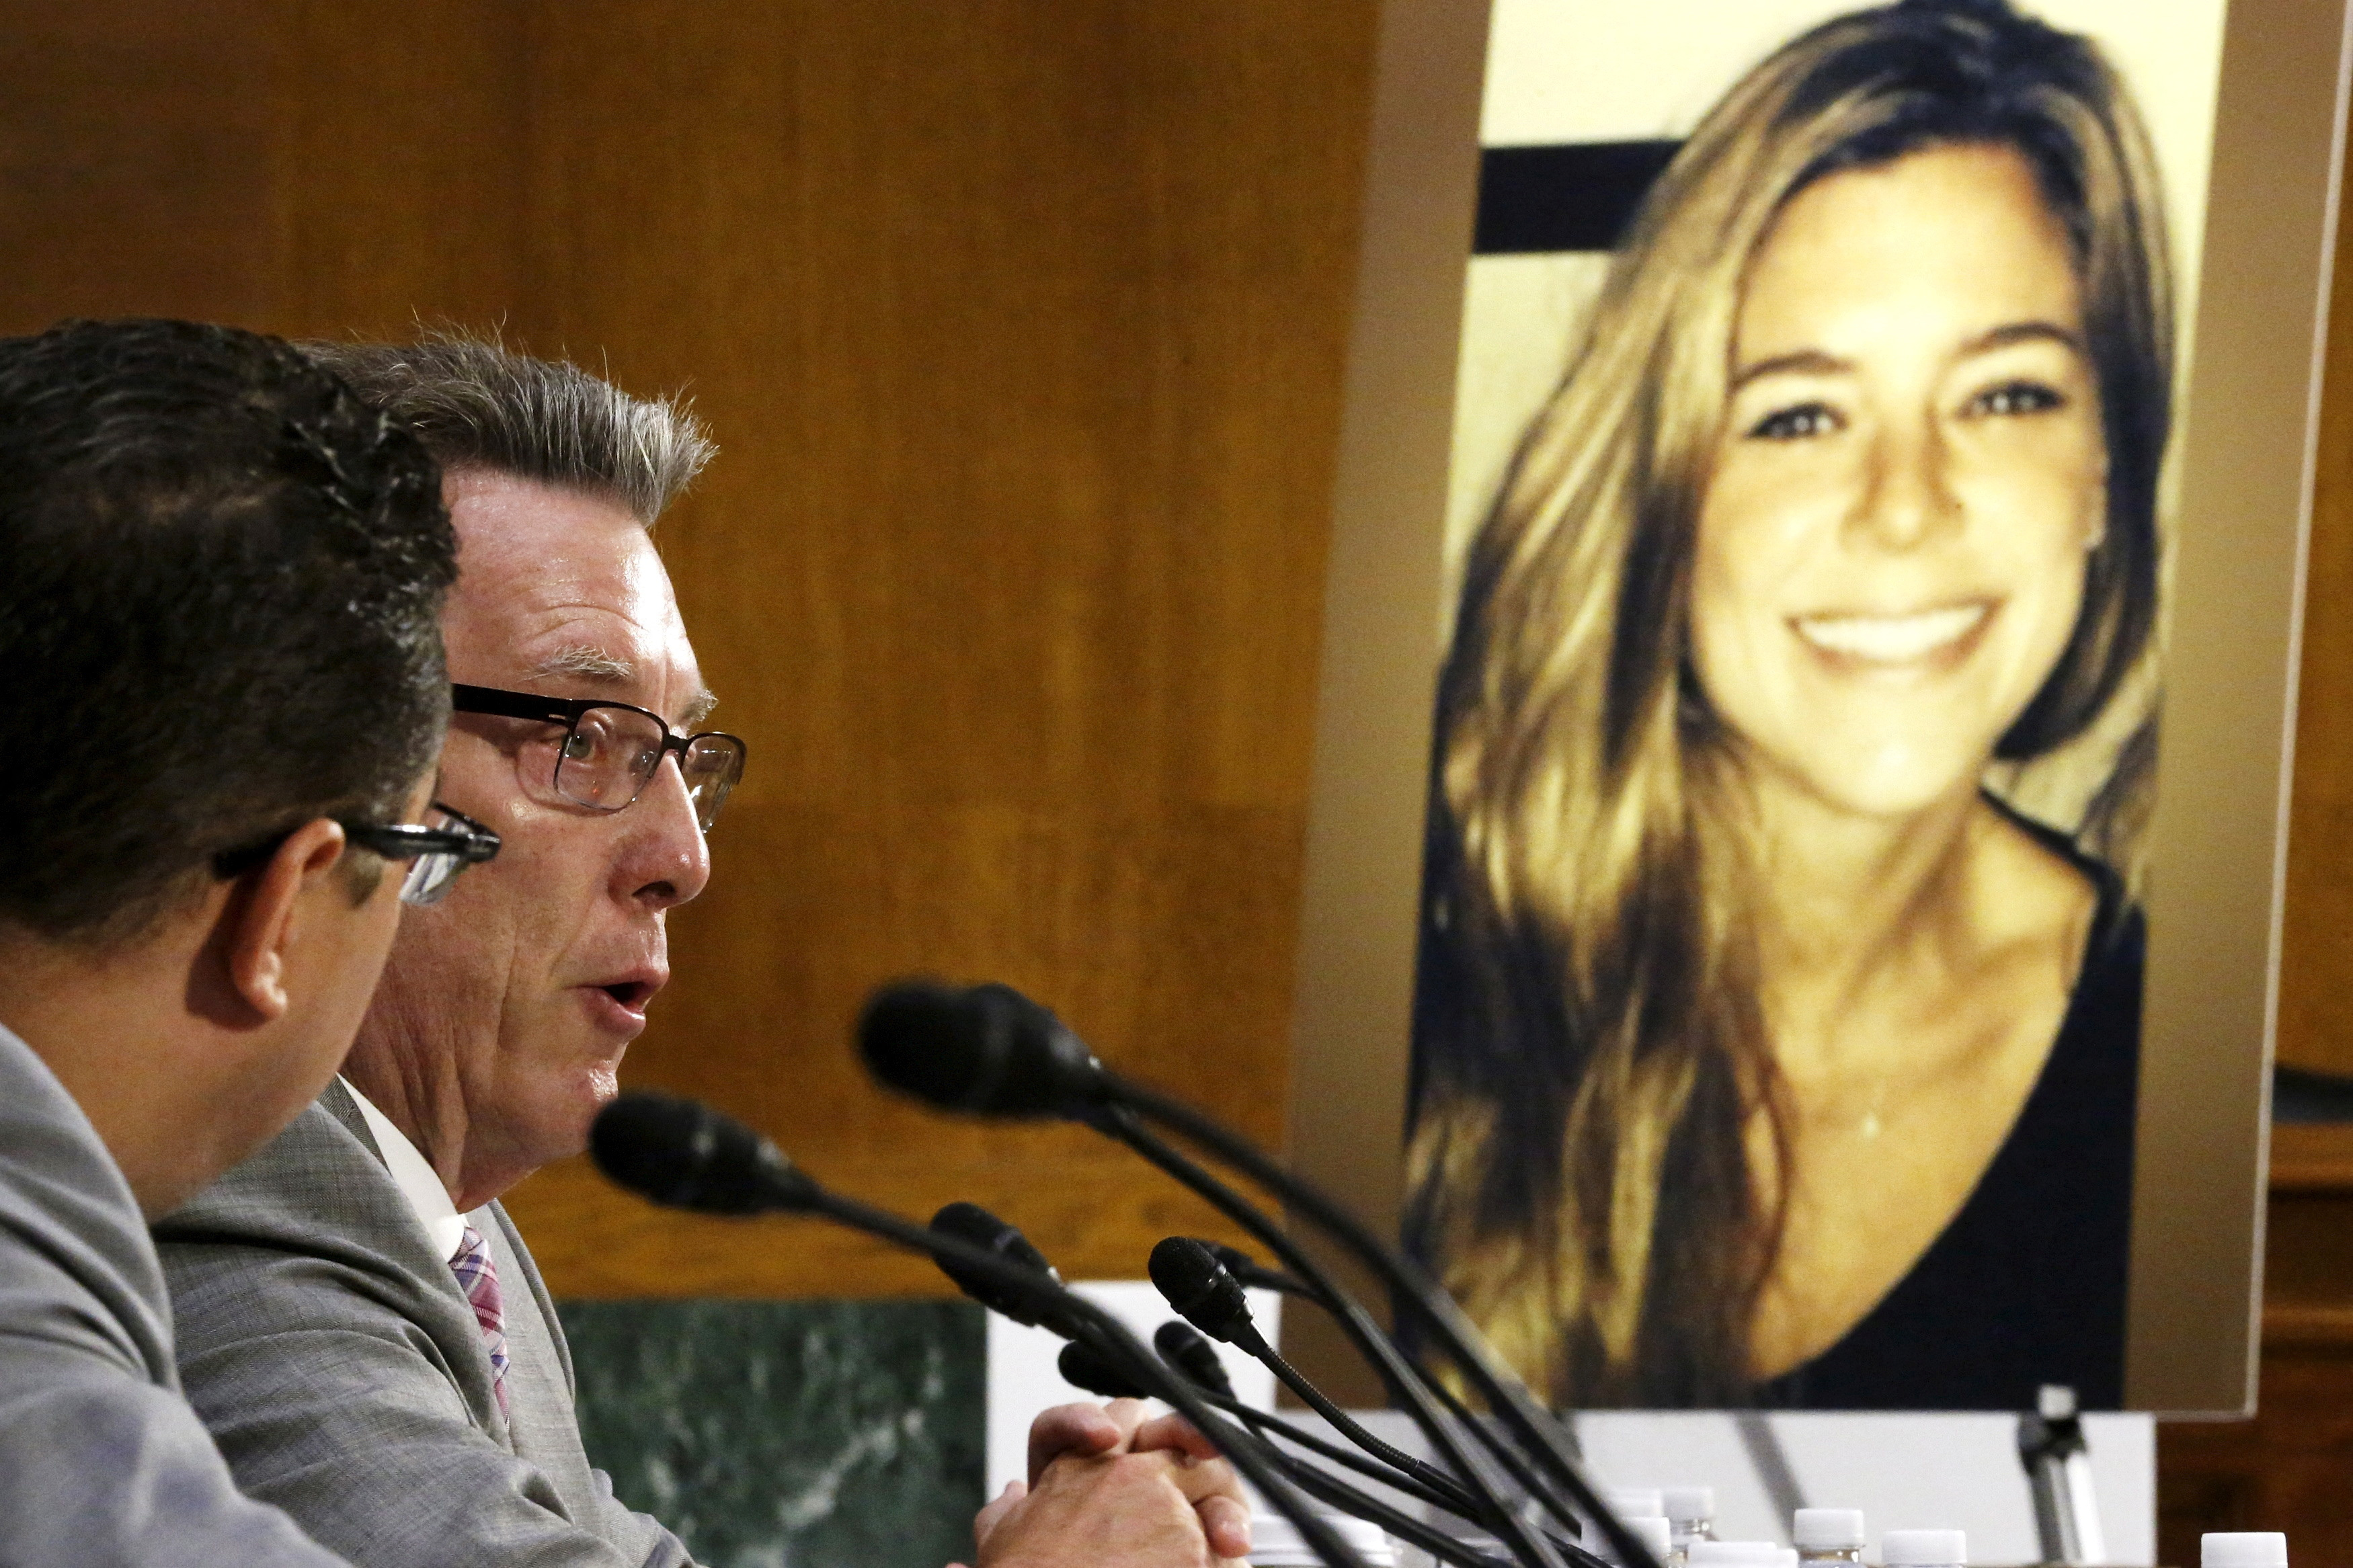 Steinle testifies about his daughter's murder during a hearing of the Senate Judiciary Committee on U.S. immigration enforcement policies, on Capitol Hill in Washington